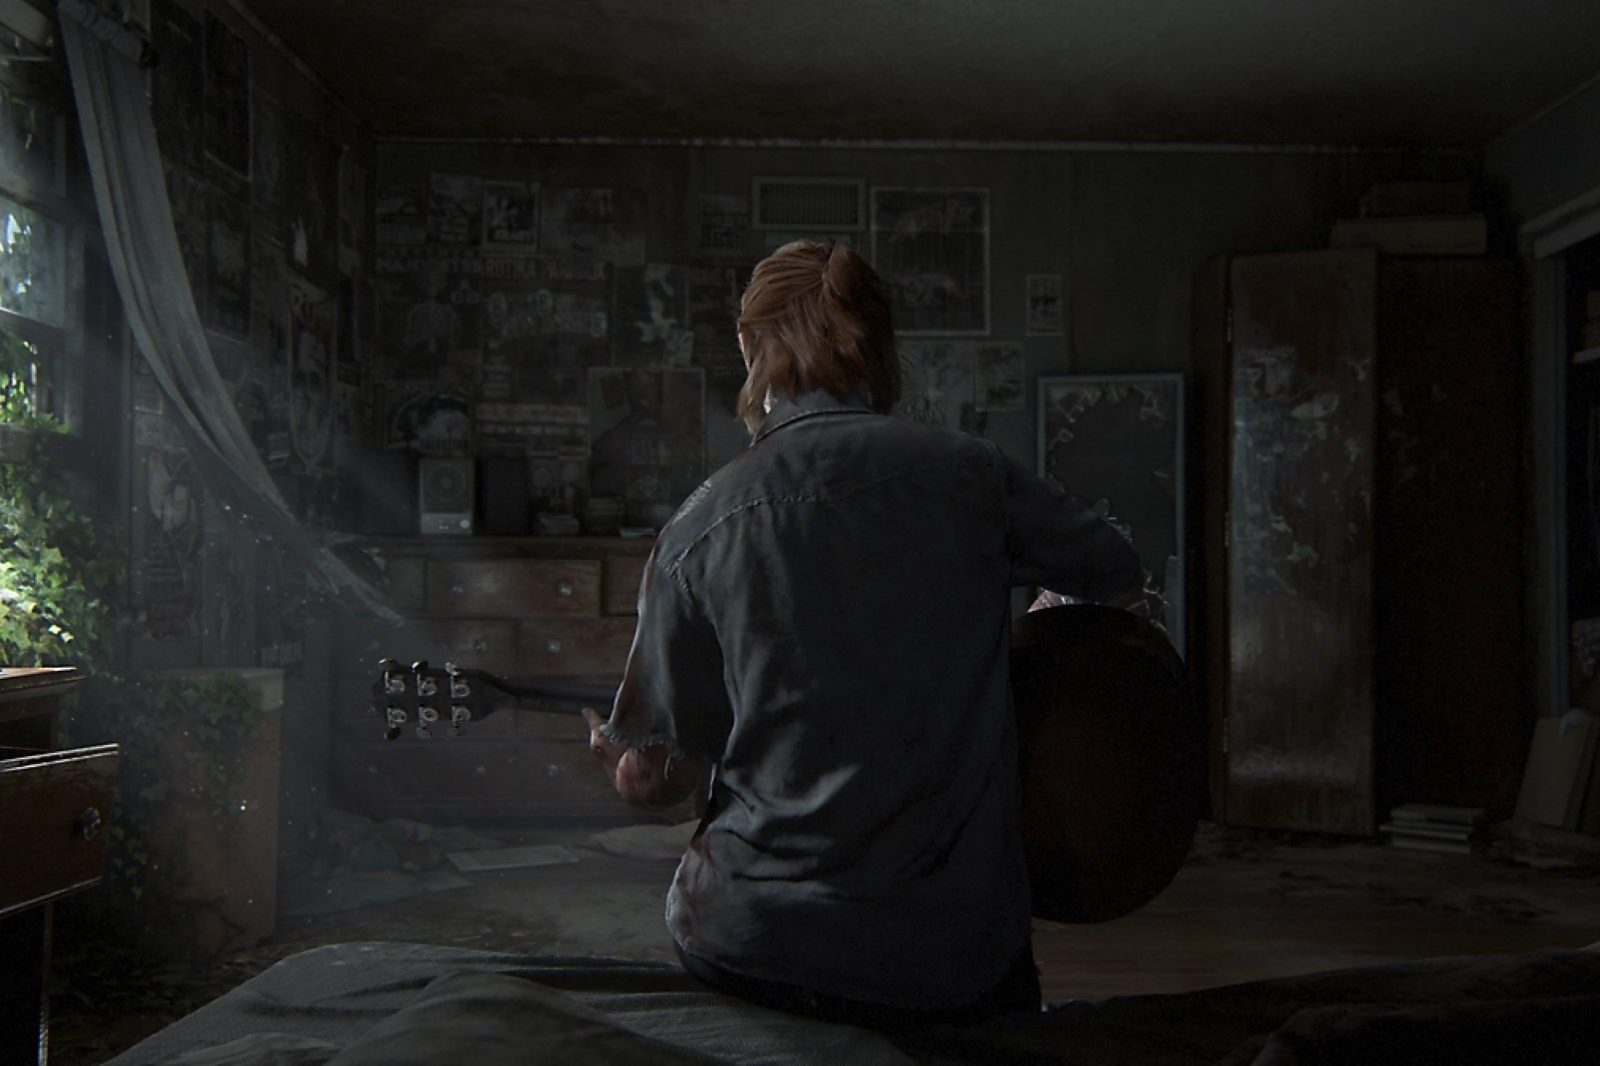 When will Last of Us Part 2 come to PC? Our best estimate